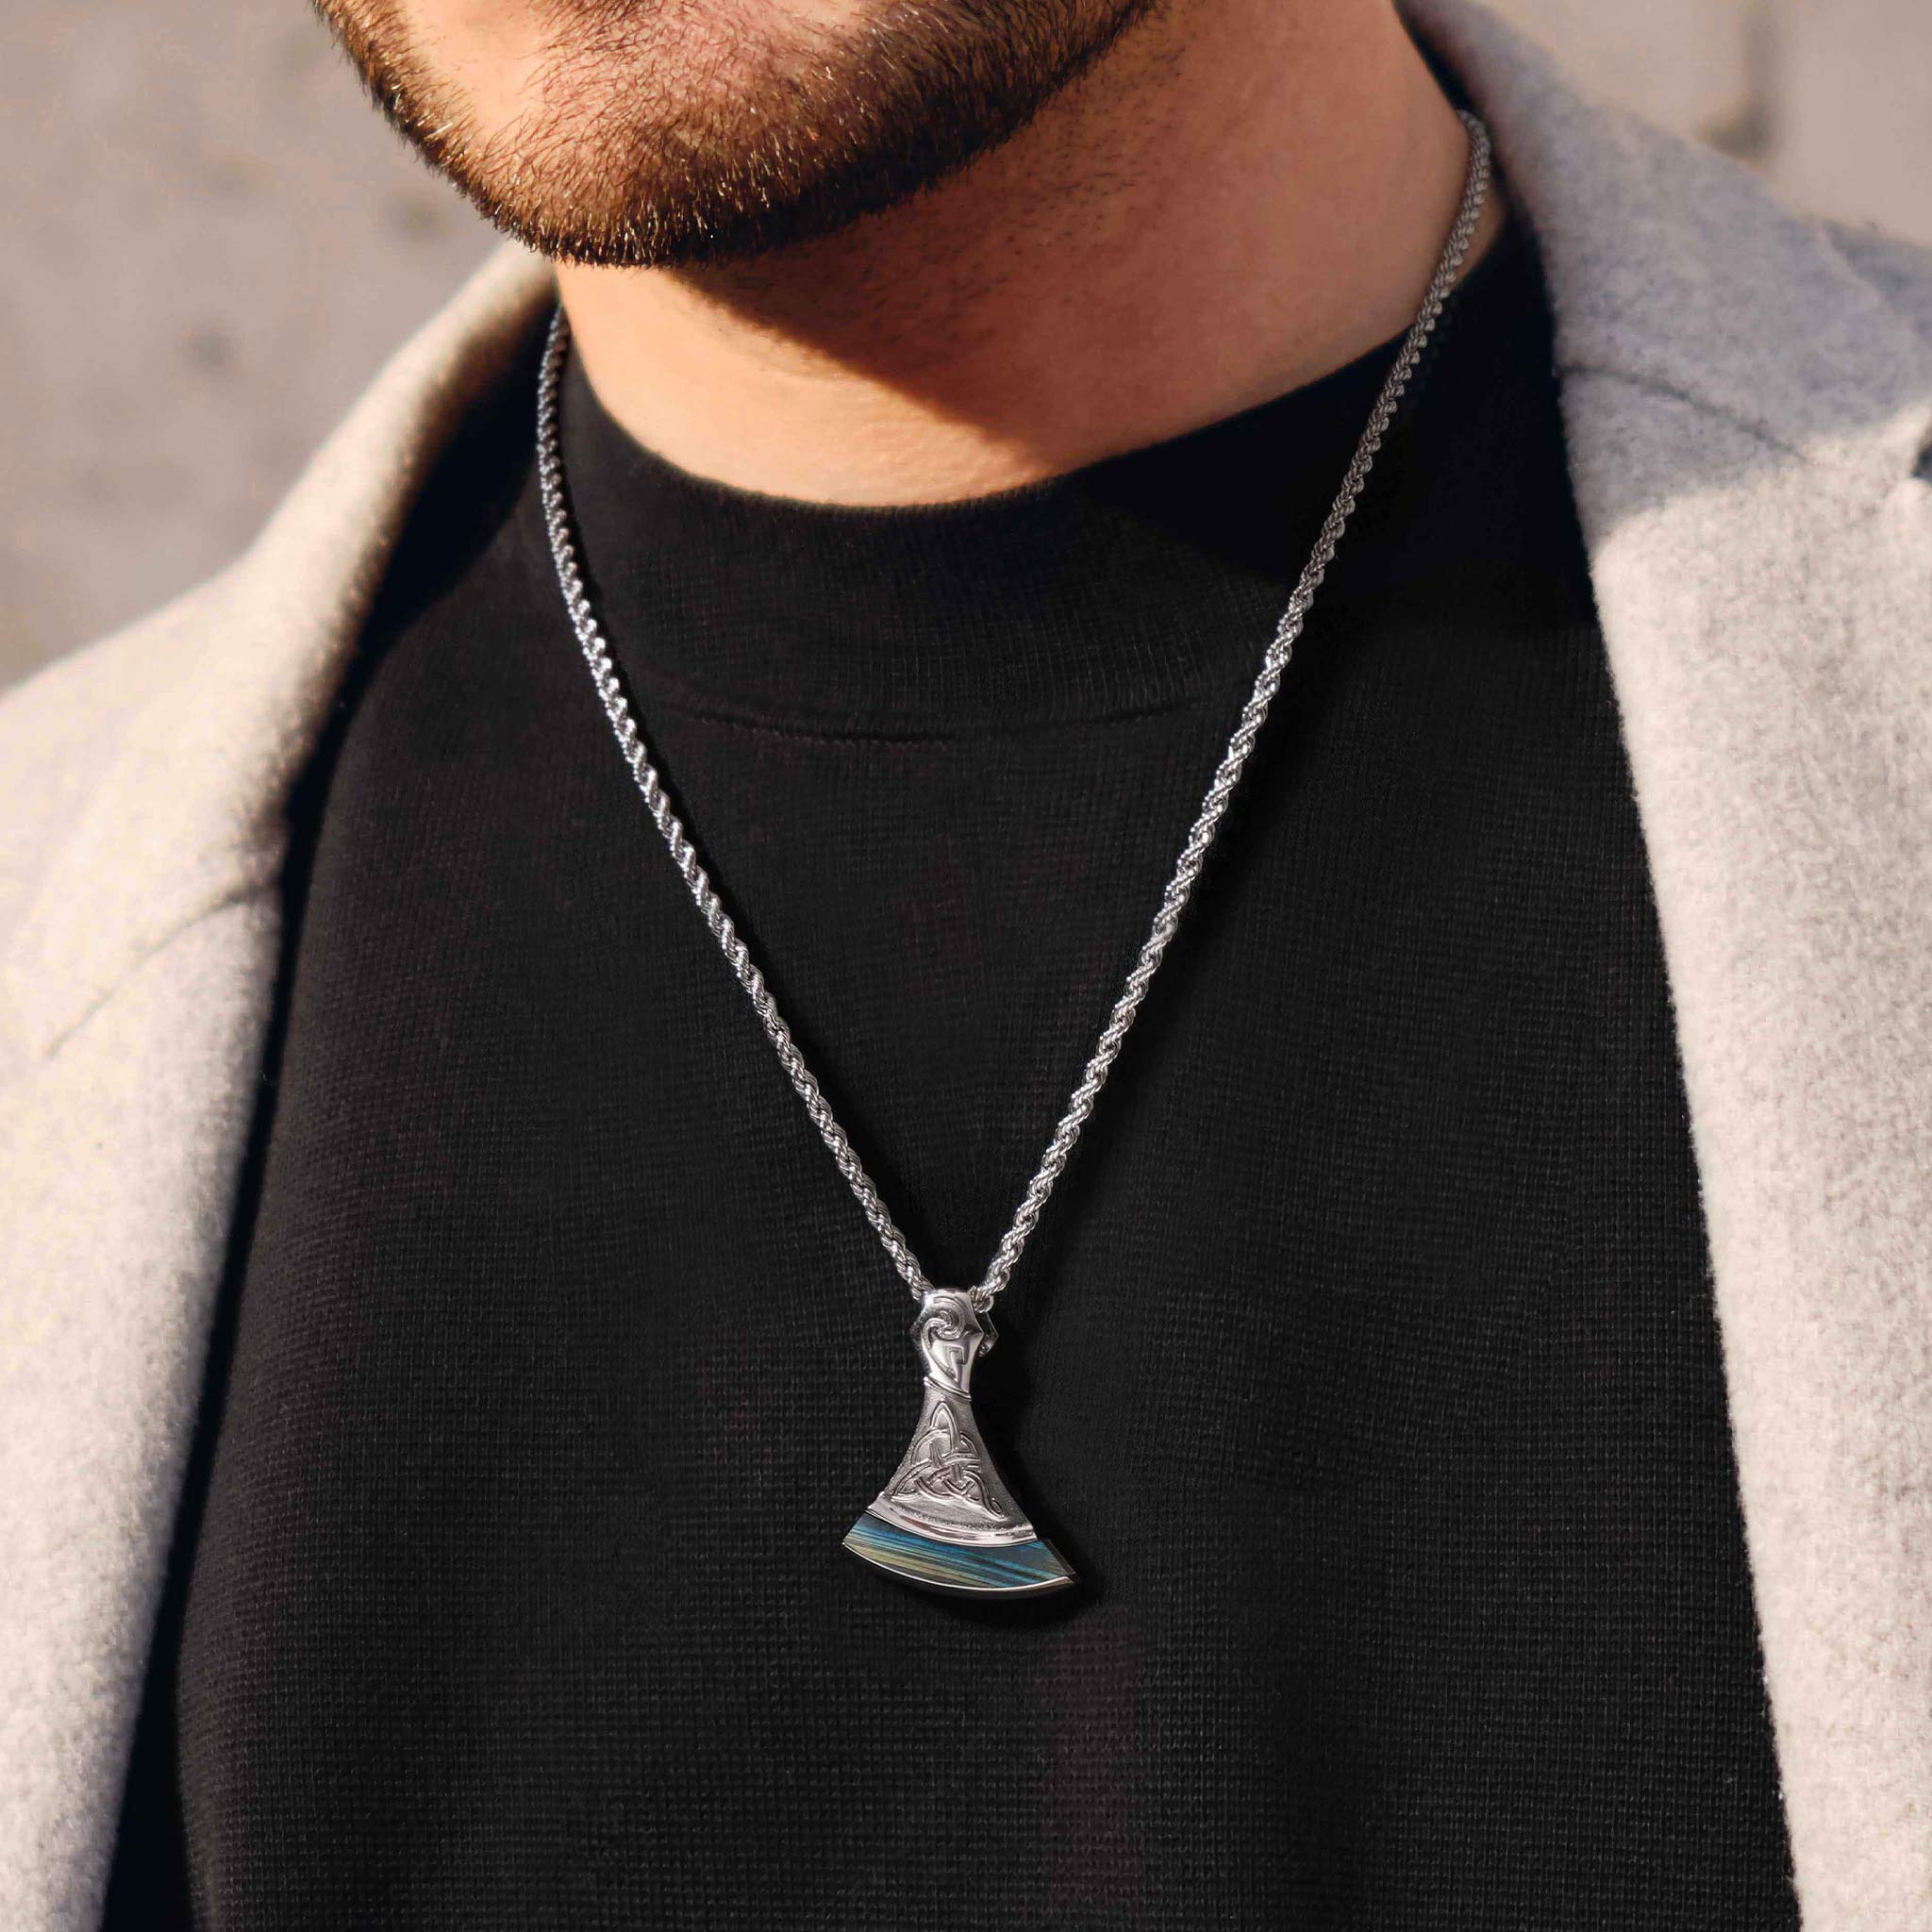 Men's Tomahawk Necklace with Spectrolite Necklaces WAA FASHION GROUP 